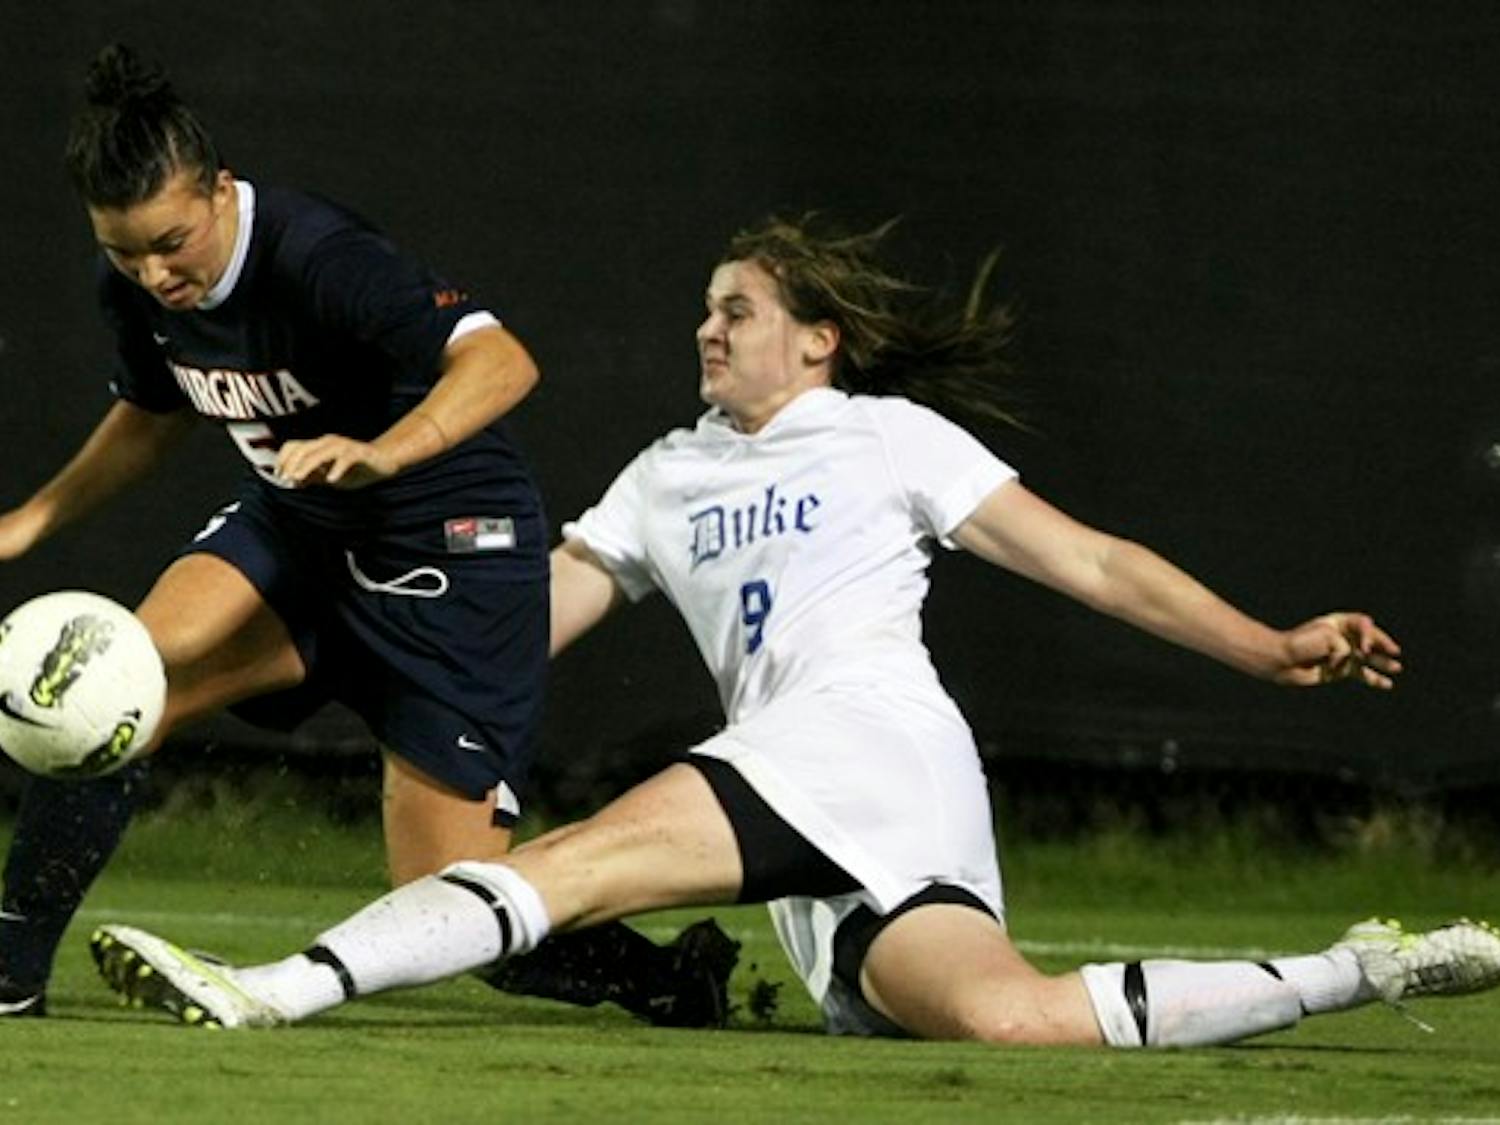 Freshman forward Kelly Cobb had two shots denied by the crossbar as No. 4 Duke was held to a 0-0 draw by ACC rival No. 14 Virginia at Koskinen Stadium.